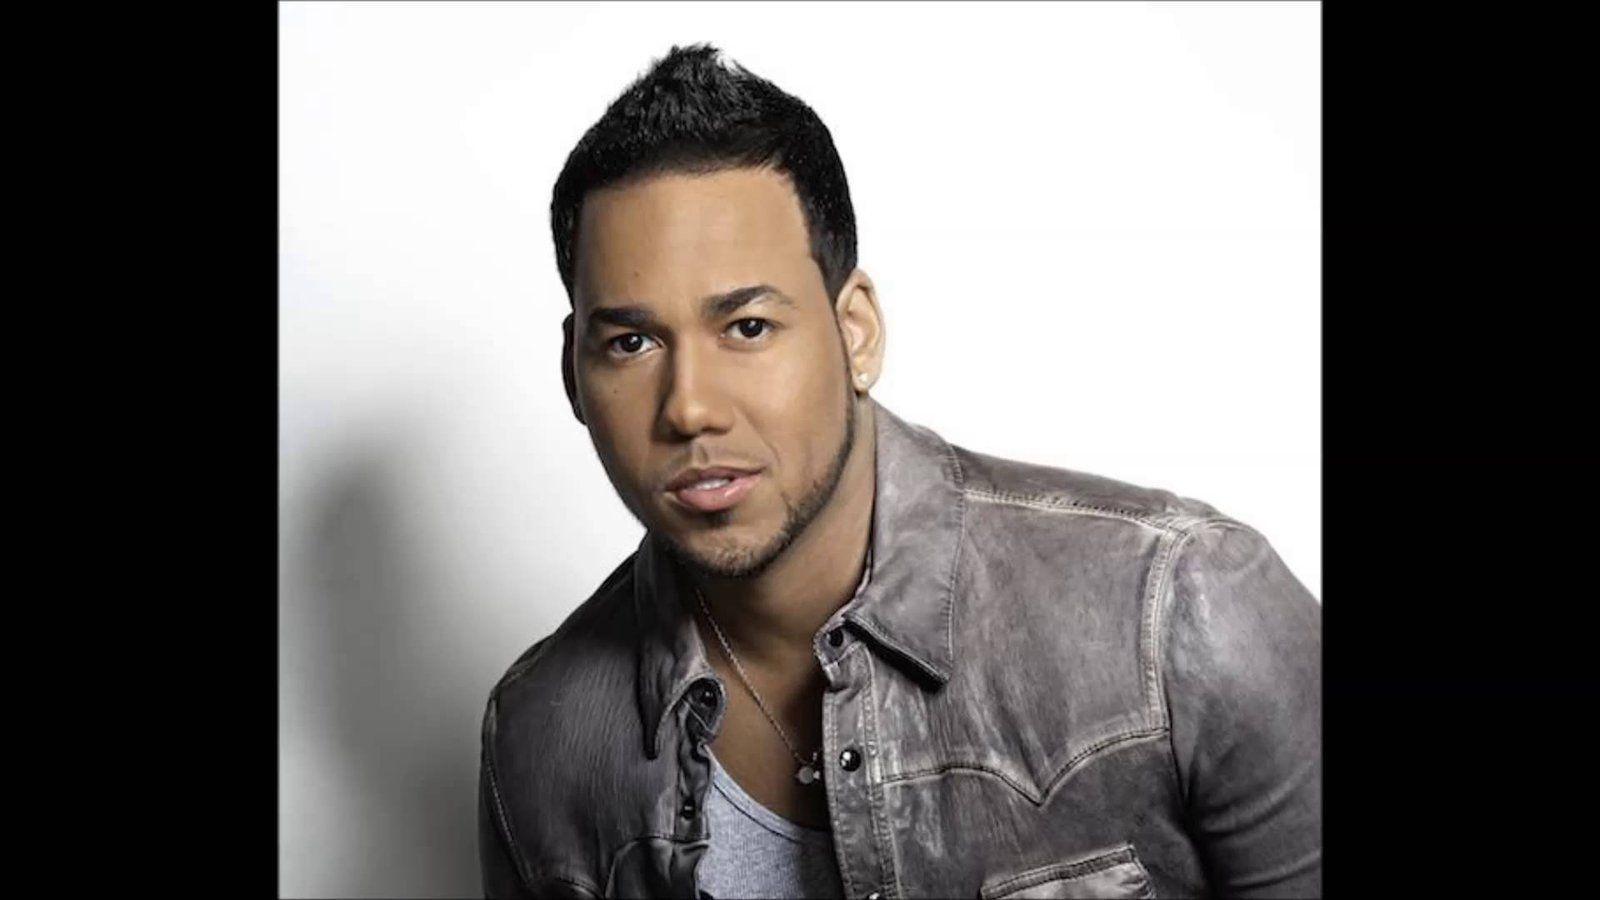 Petition · Romeo Santos Wax Figure at Madame Tussauds in NYC: Give